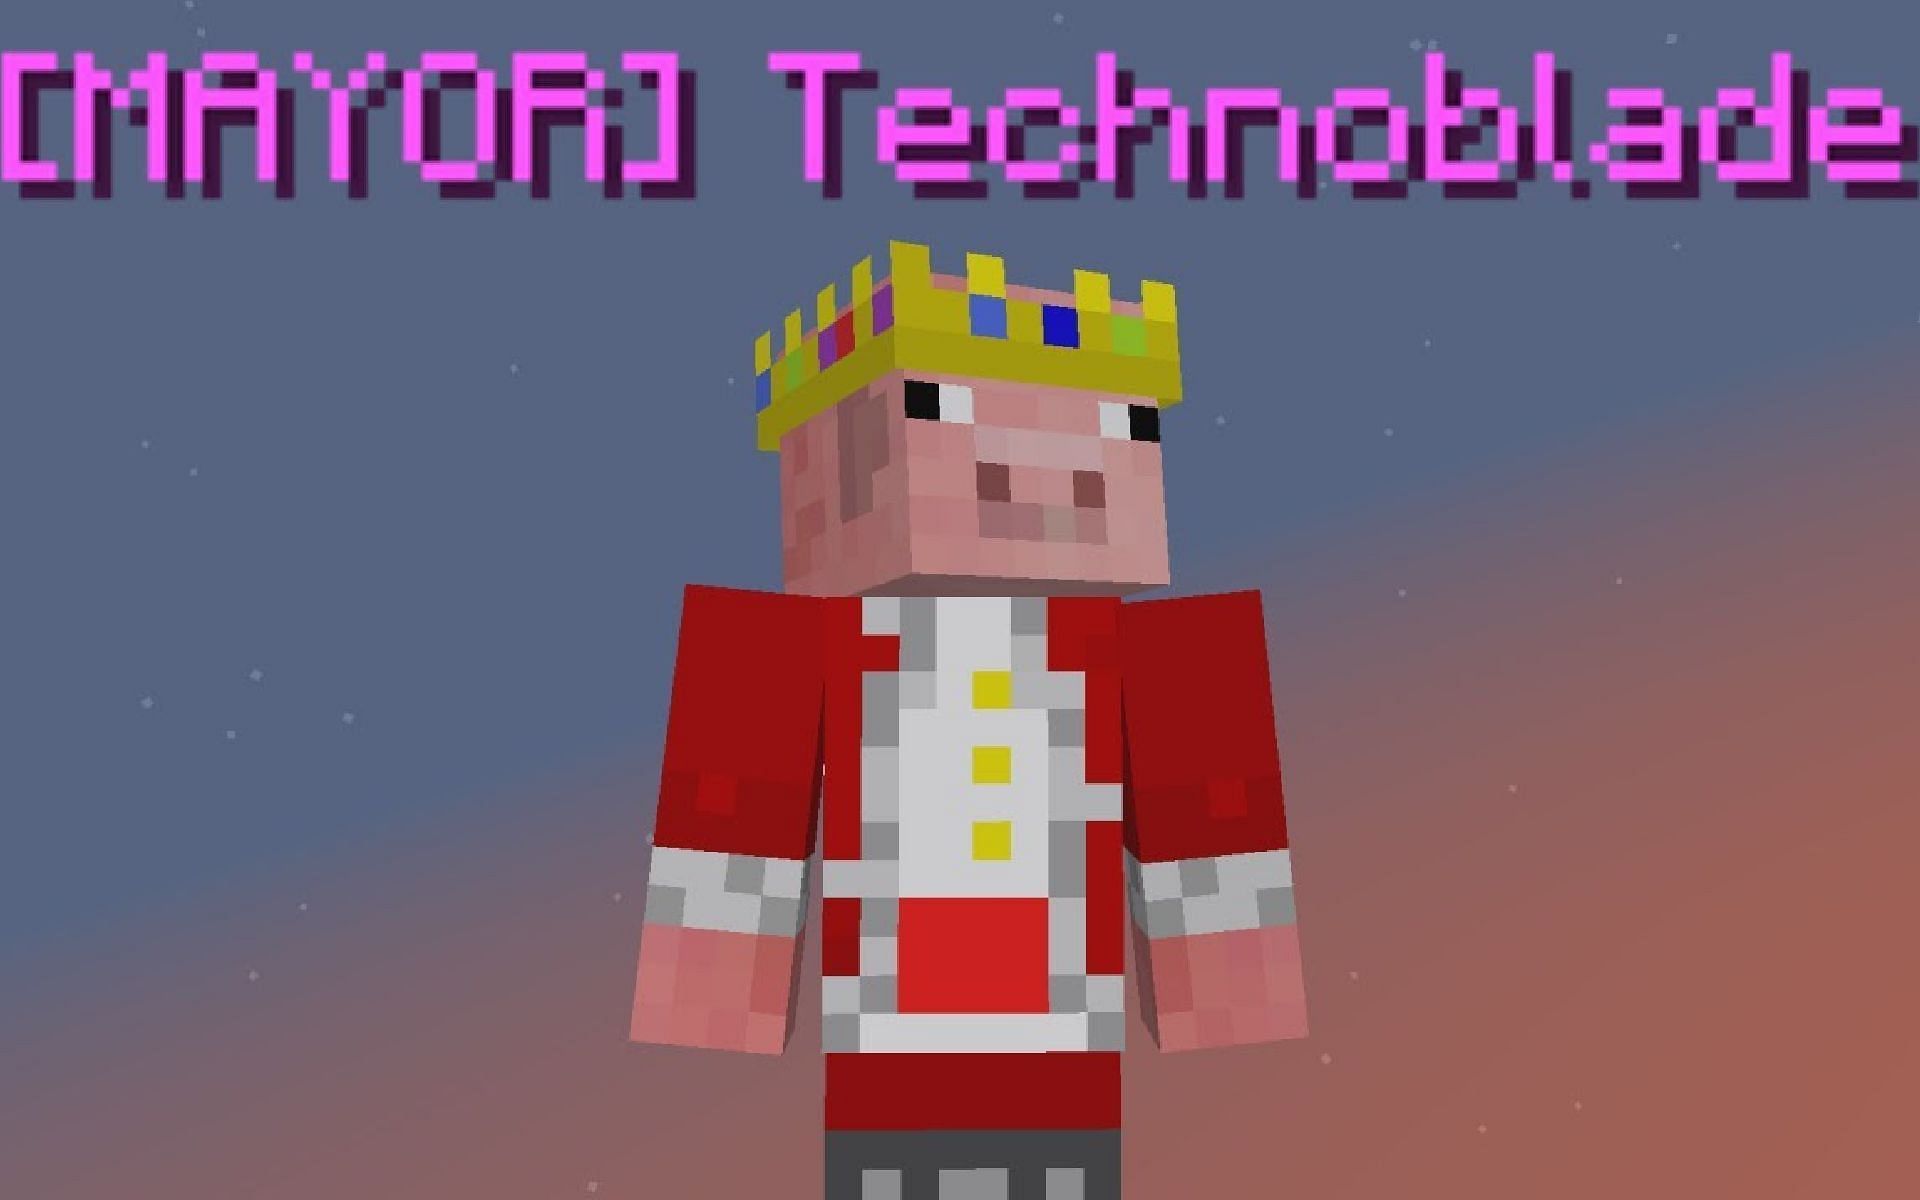 Technoblade was a very popular Minecraft content creator who passed away on July 1, 2022 (Image via Technoblade/YouTube)